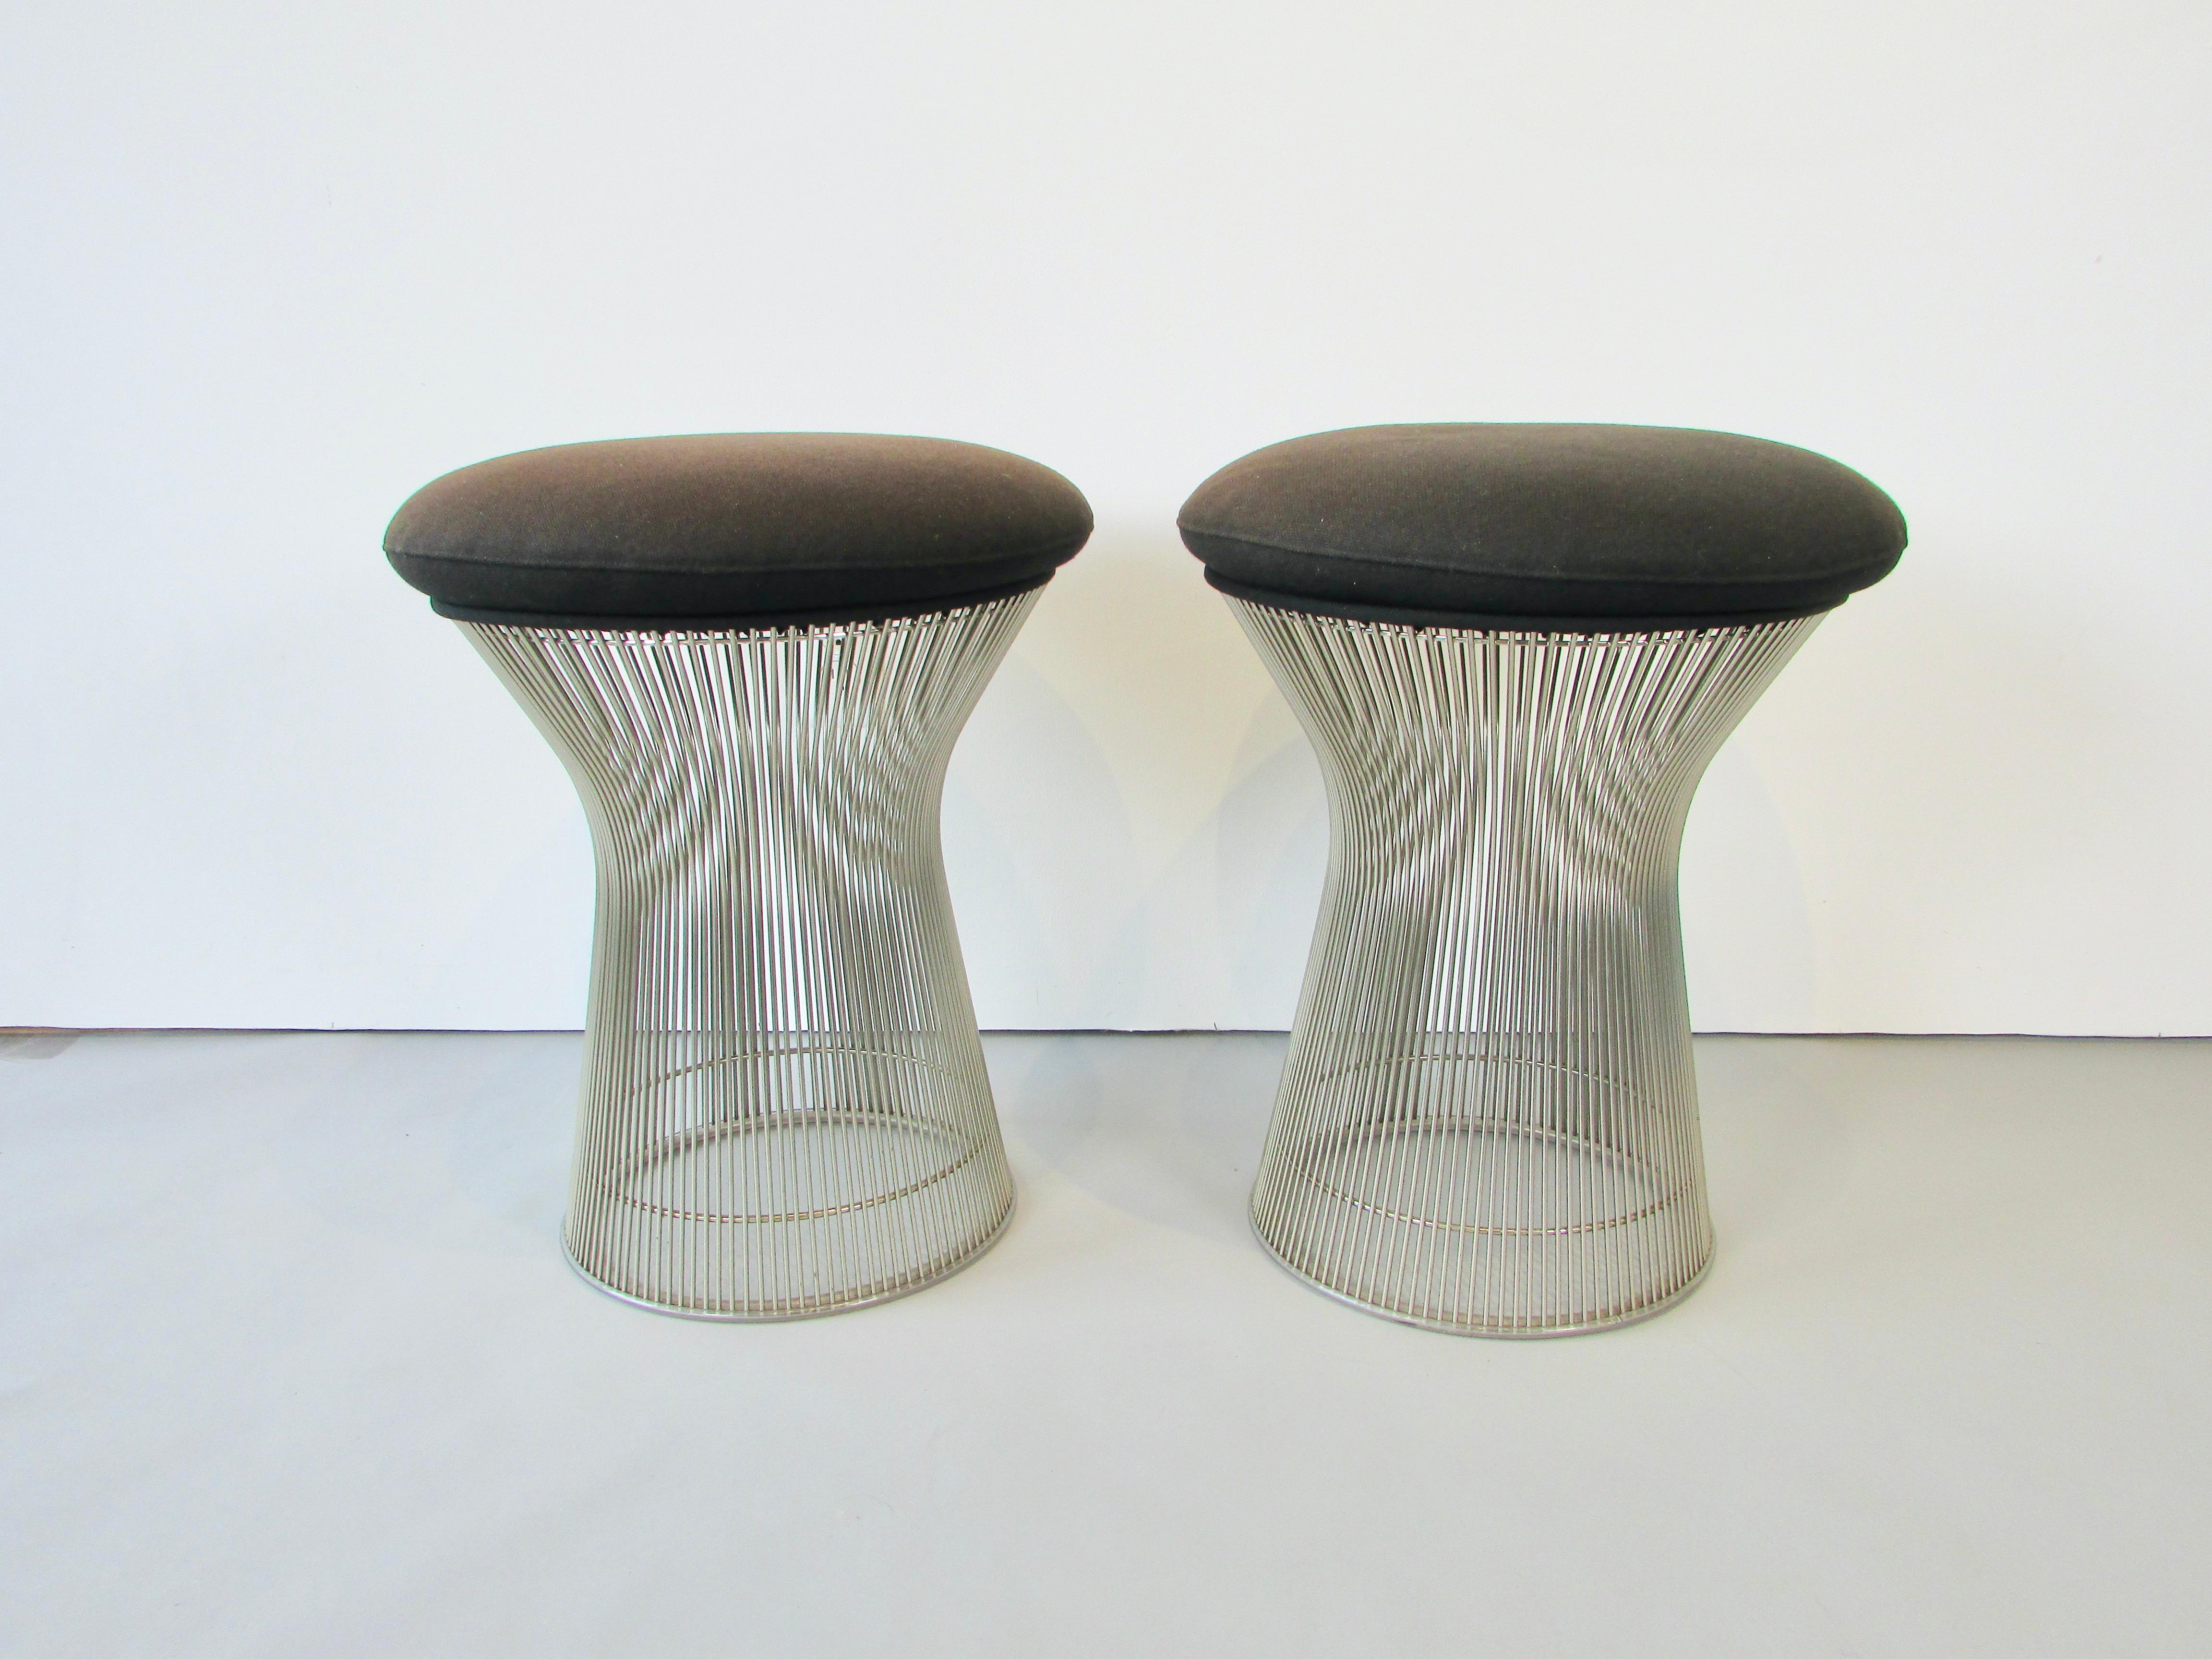 Platner collection for Knoll originally designed by Warren Platner in 1962. Finally launched after four years of development in 1966. Undulating nickel plated rods echo the light airiness of Harry Berrtoias work and the sculptural forms of Eero